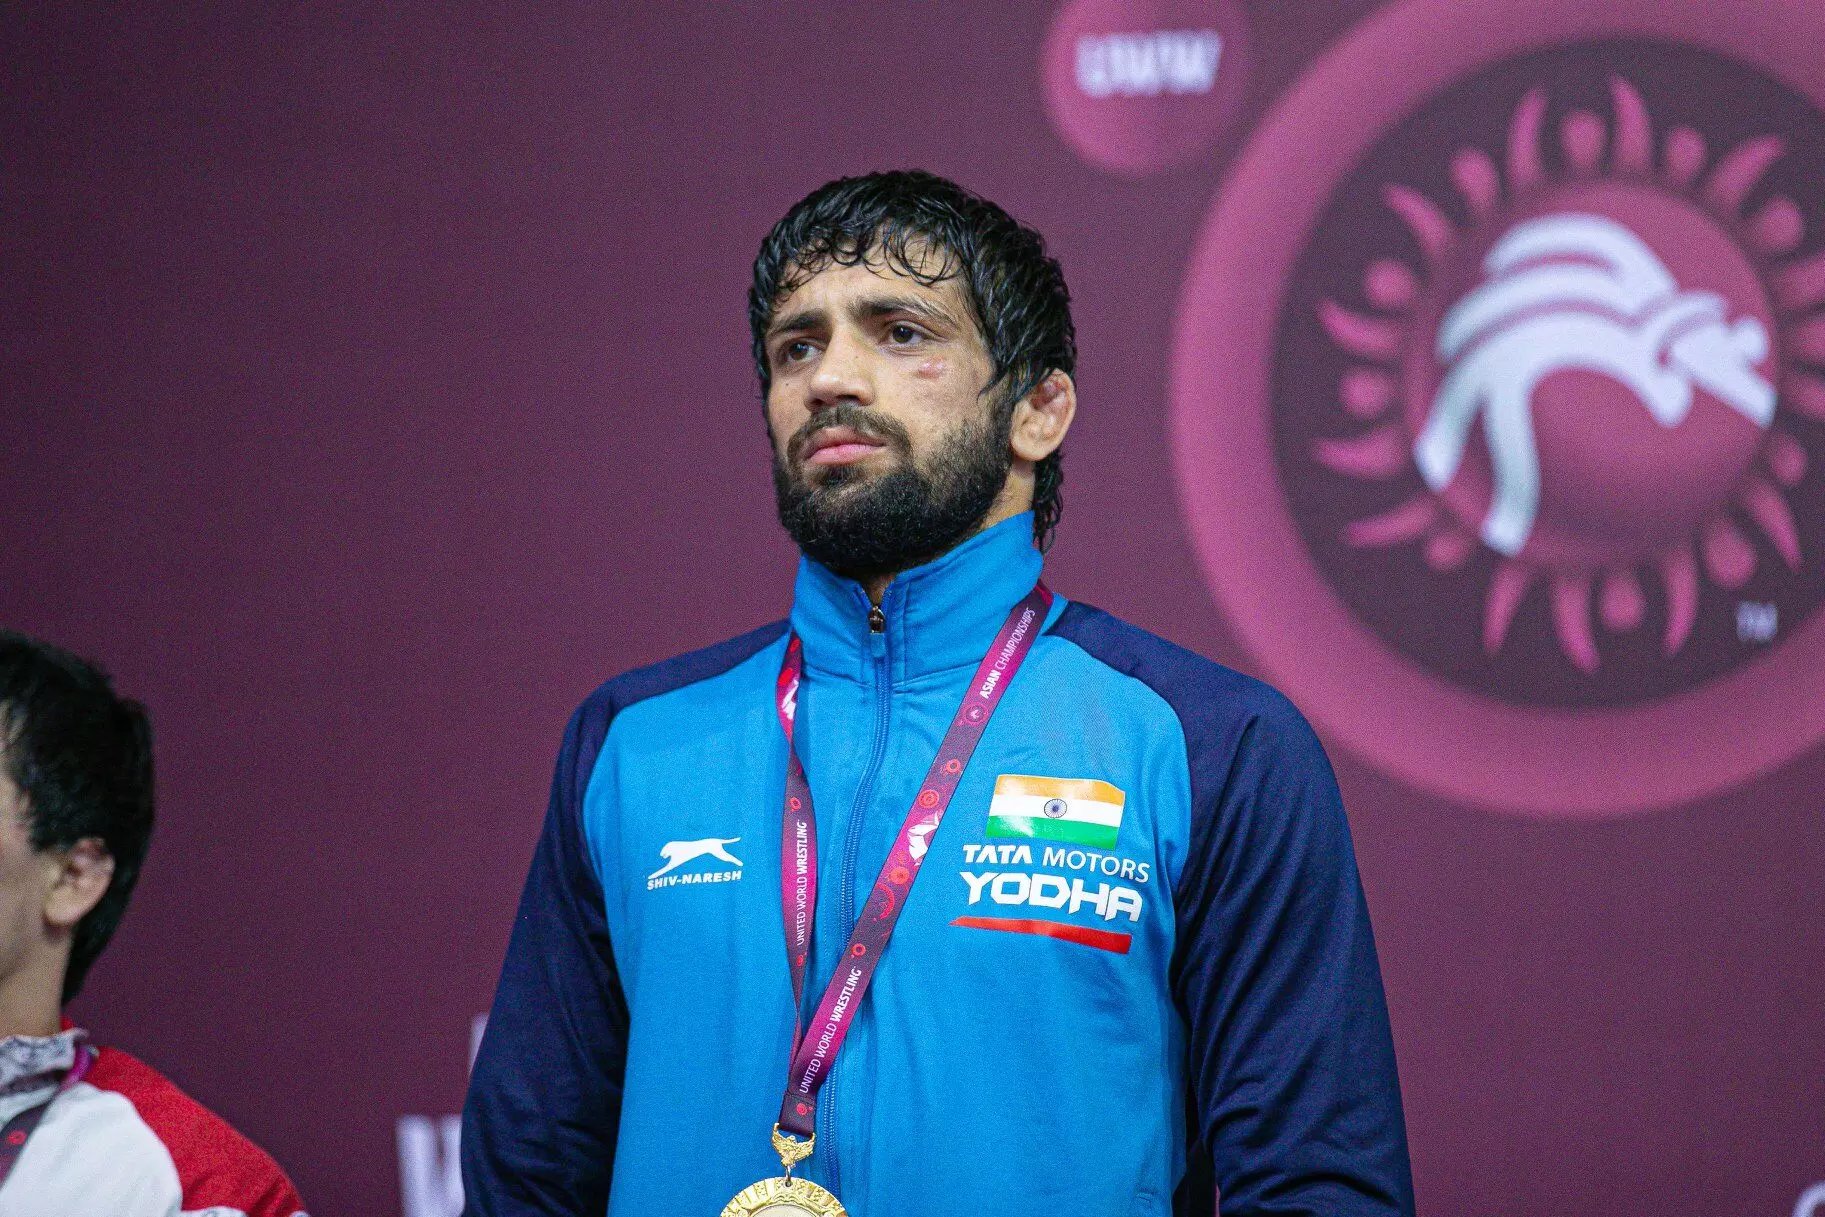 CWG 2022 Wrestling LIVE: Ravikumar Dahiya led 12-member Indian Wrestling contingent aim to collect bagful of medals at Commonwealth Games 2022, Check full squad, Draws, Schedule & LIVE Streaming details